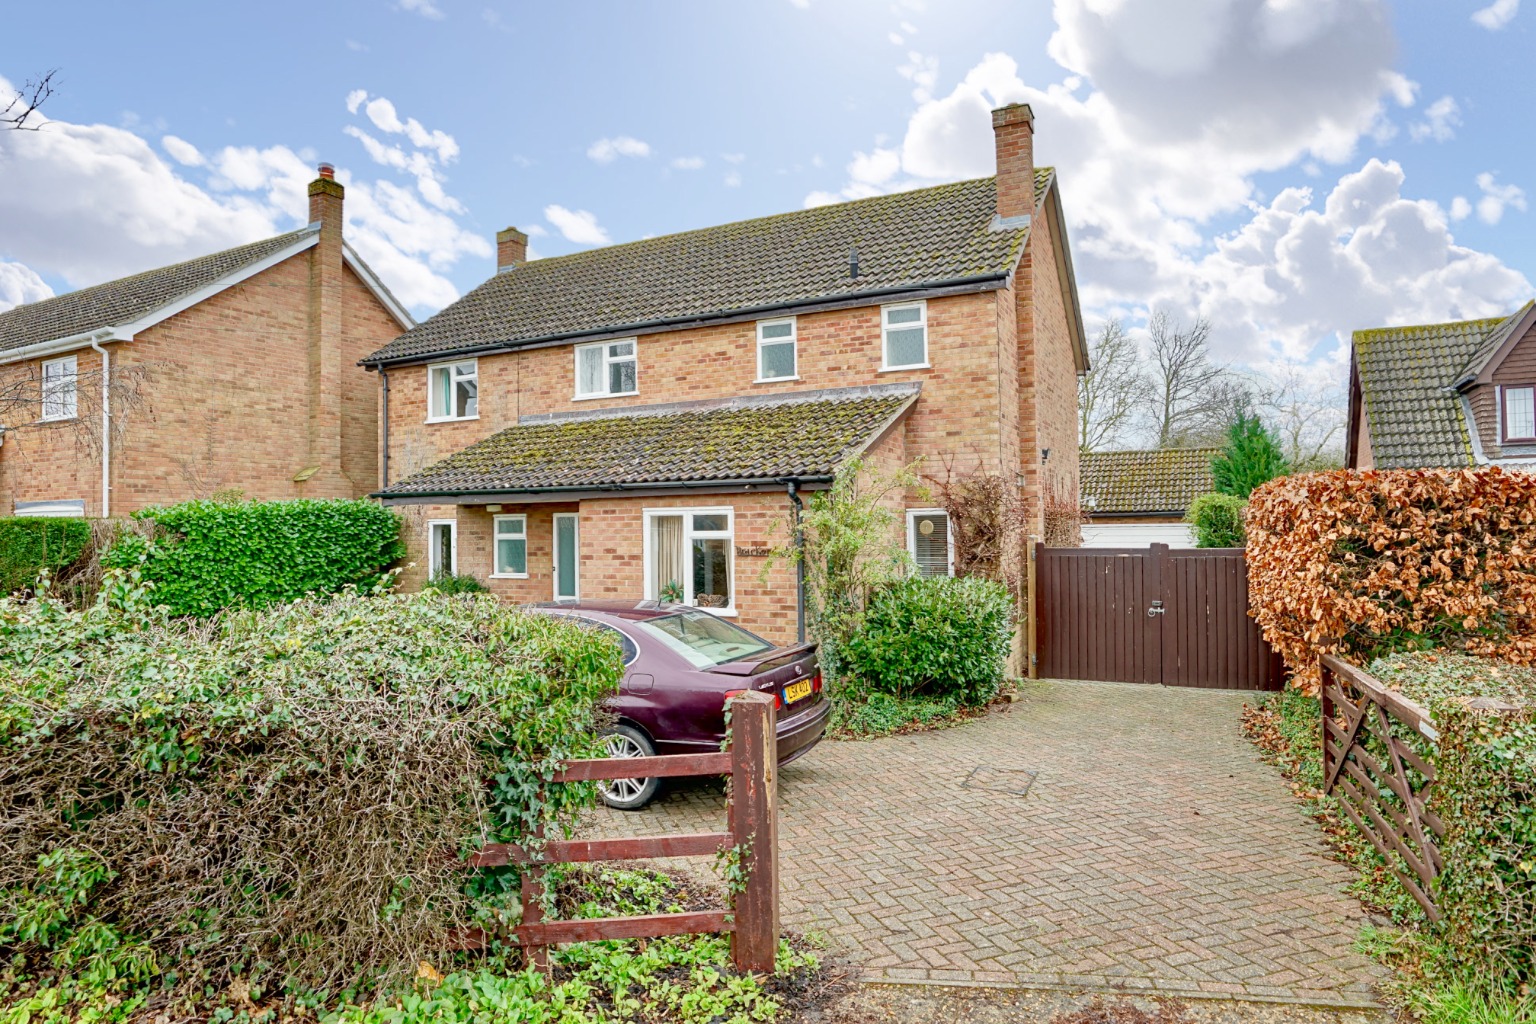 4 bed detached house for sale in High Street, Huntingdon - Property Image 1